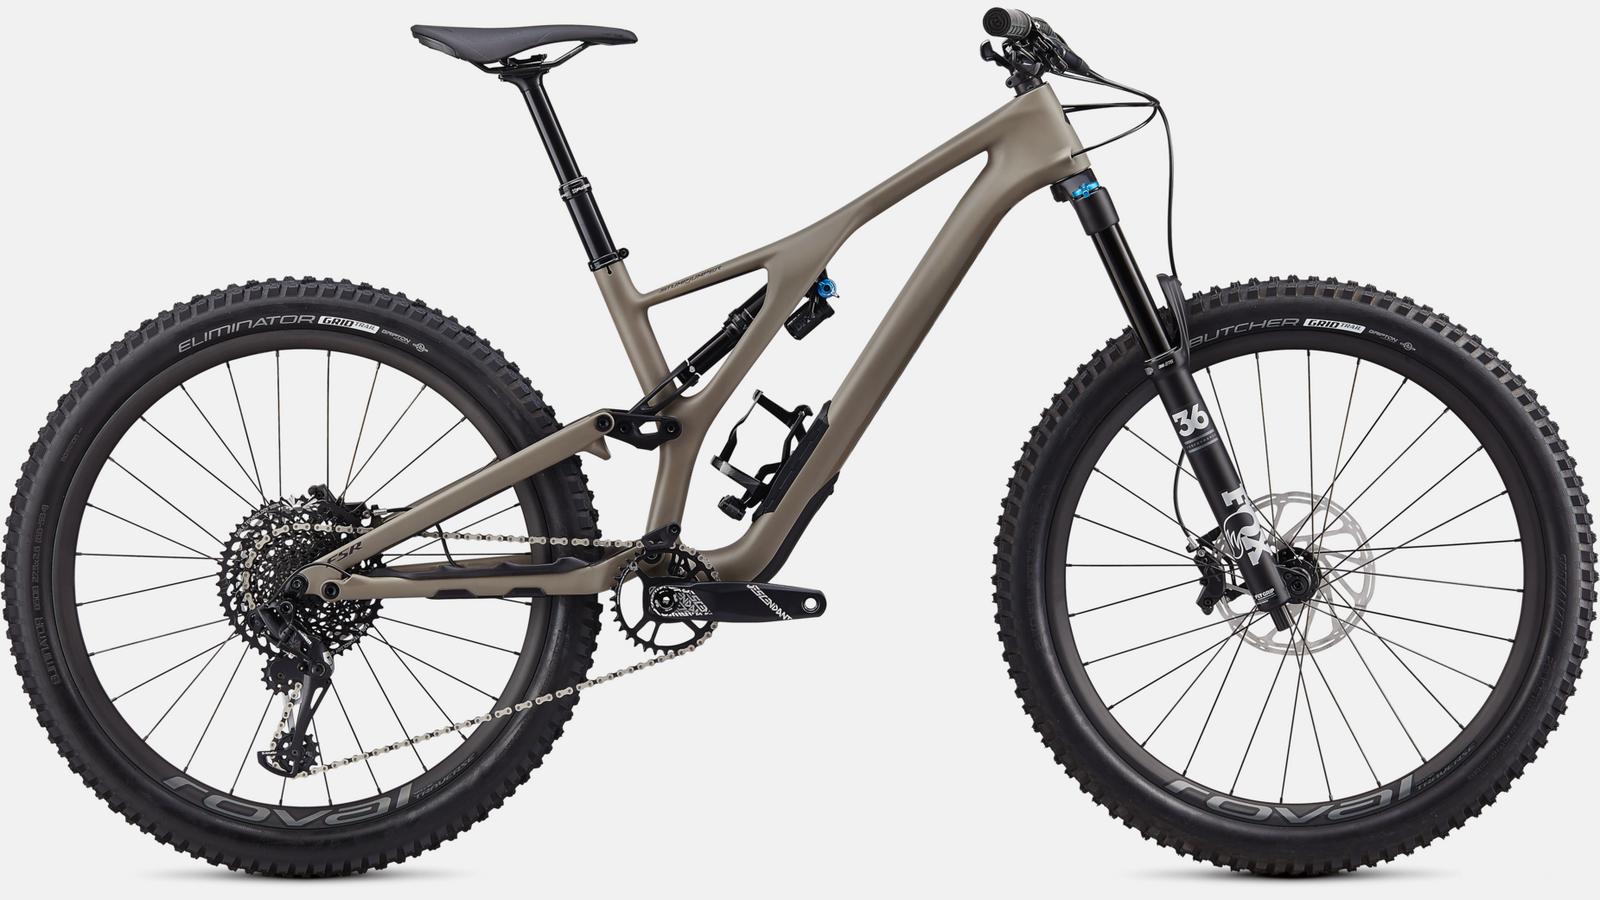 Paint for 2020 Specialized Stumpjumper Expert Carbon 27.5 - Satin Taupe